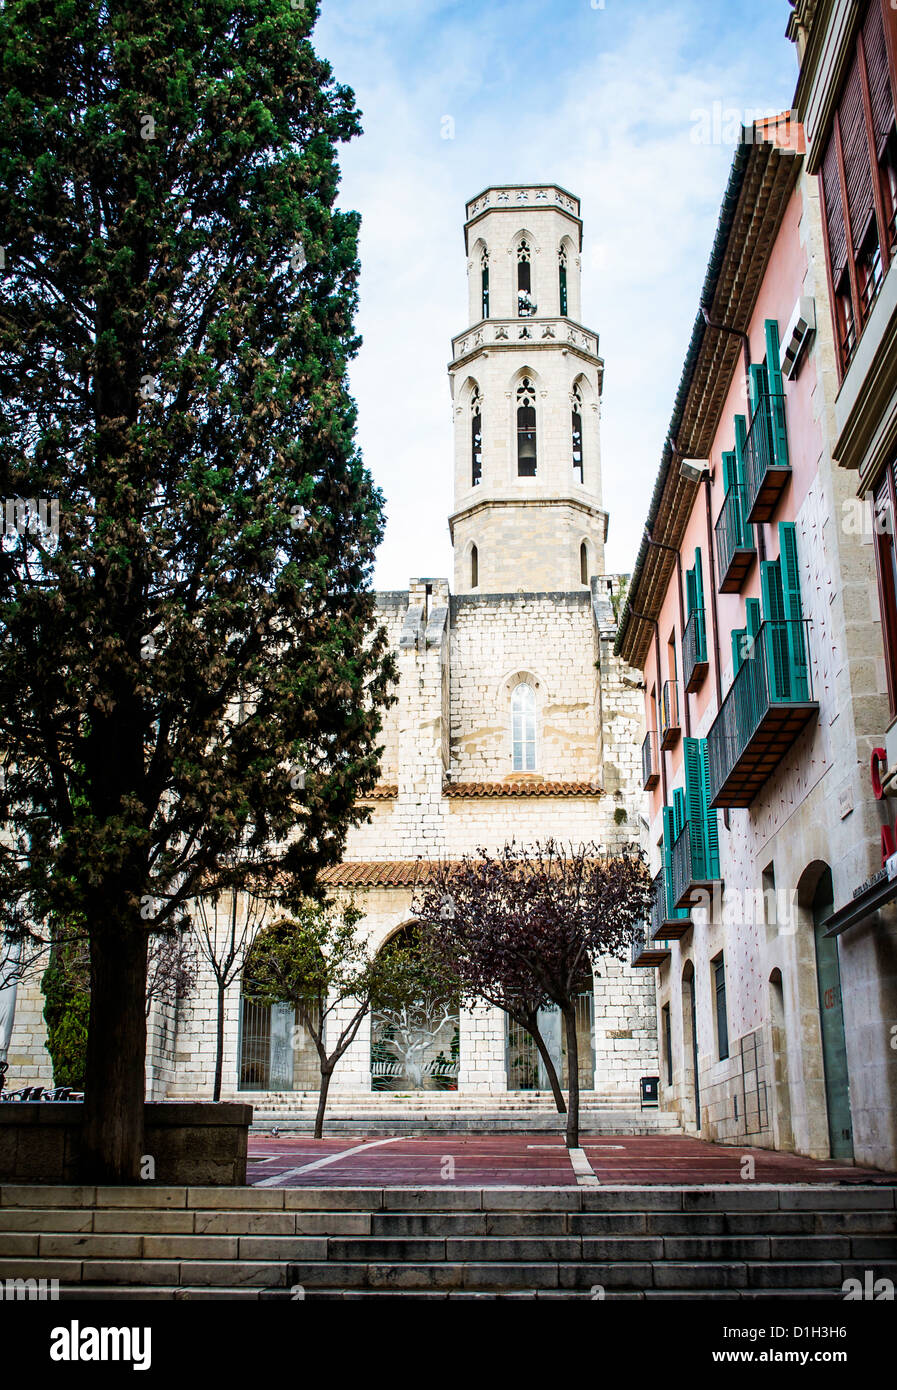 St. Pere Church tower across a plaza in Figueres, Spain. This medieval church was Salvadore Dali's family church. Stock Photo